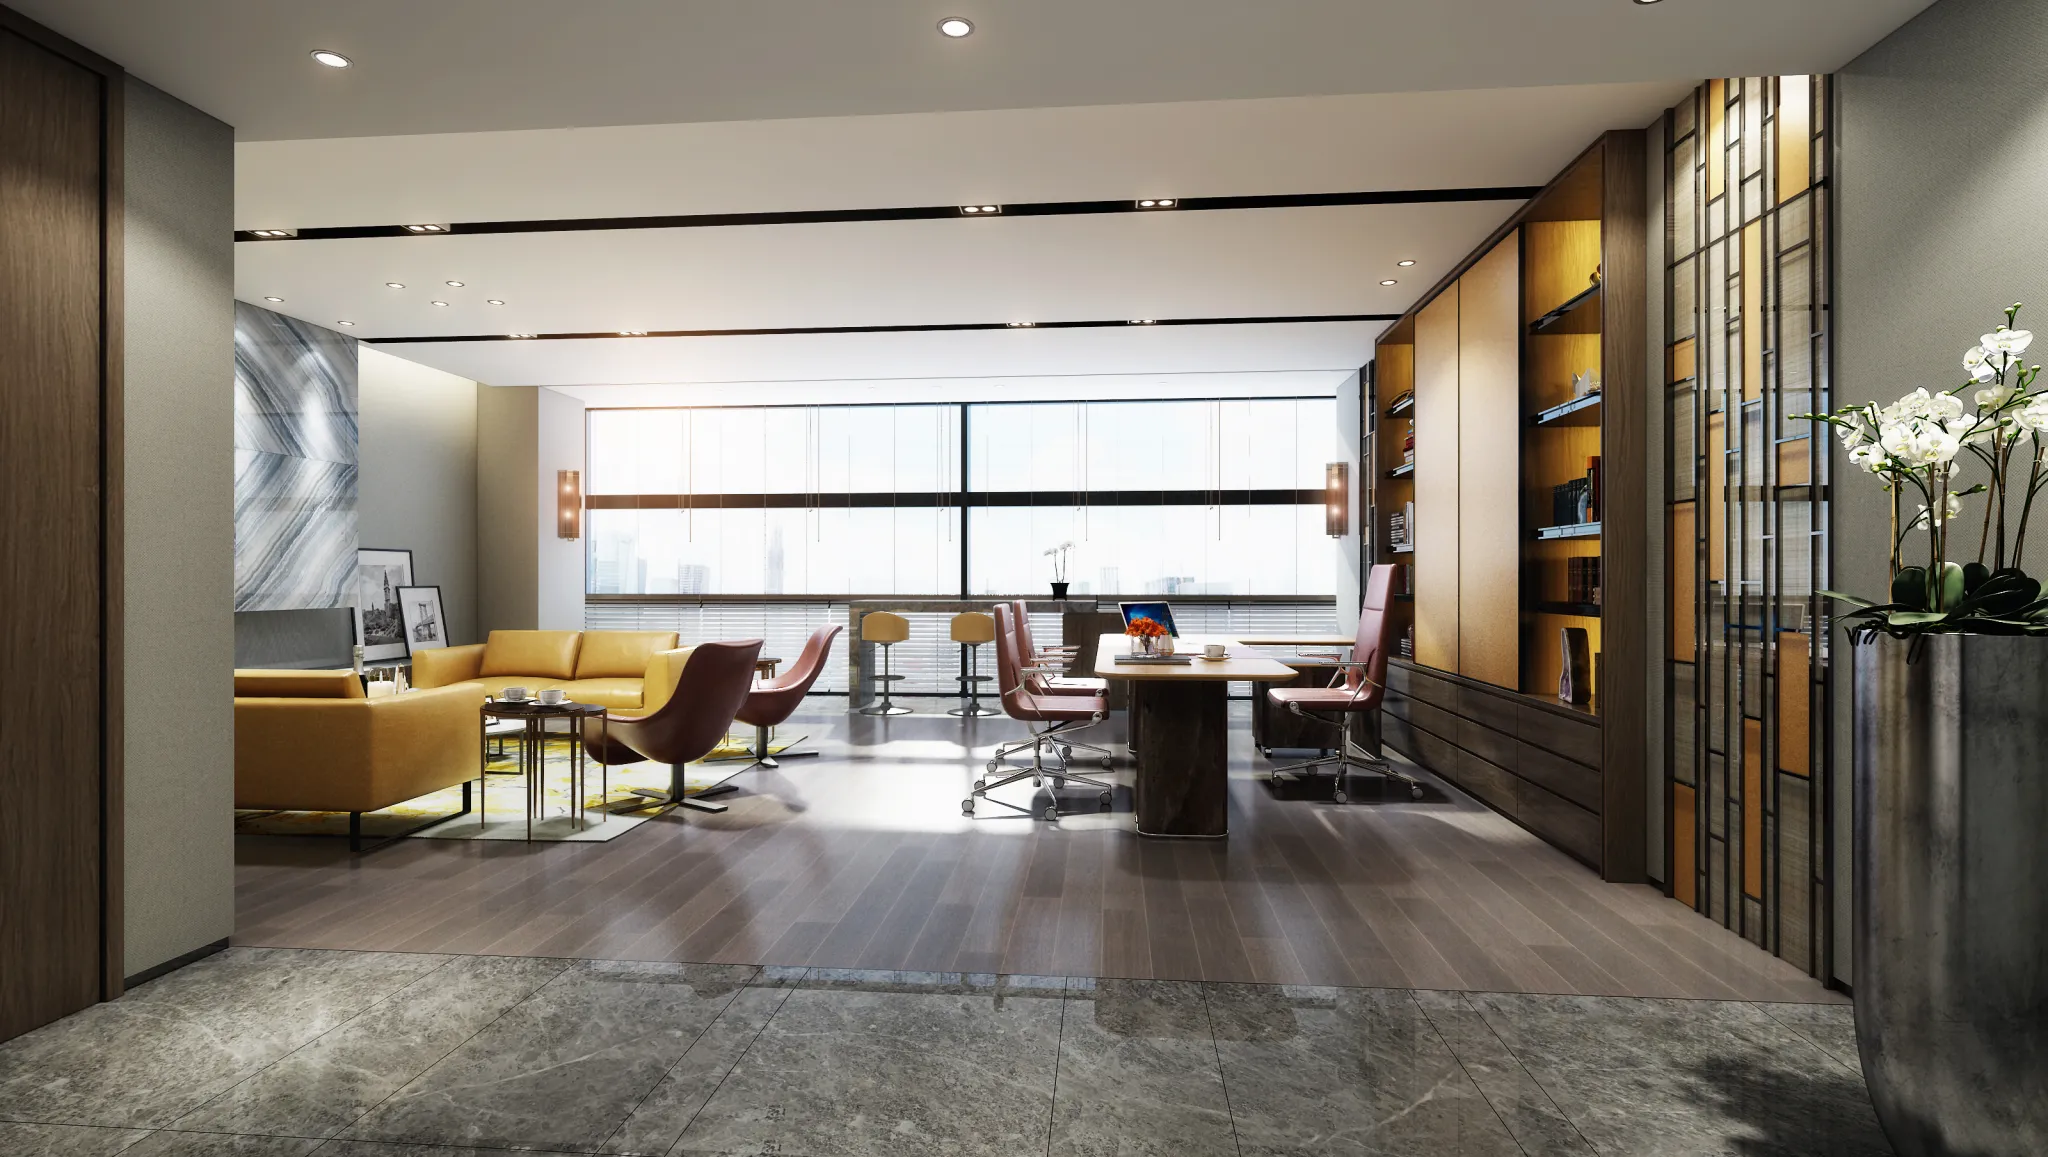 3D OFFICE INTERIOR (VRAY) – MANAGER ROOM 3D SCENES – 141